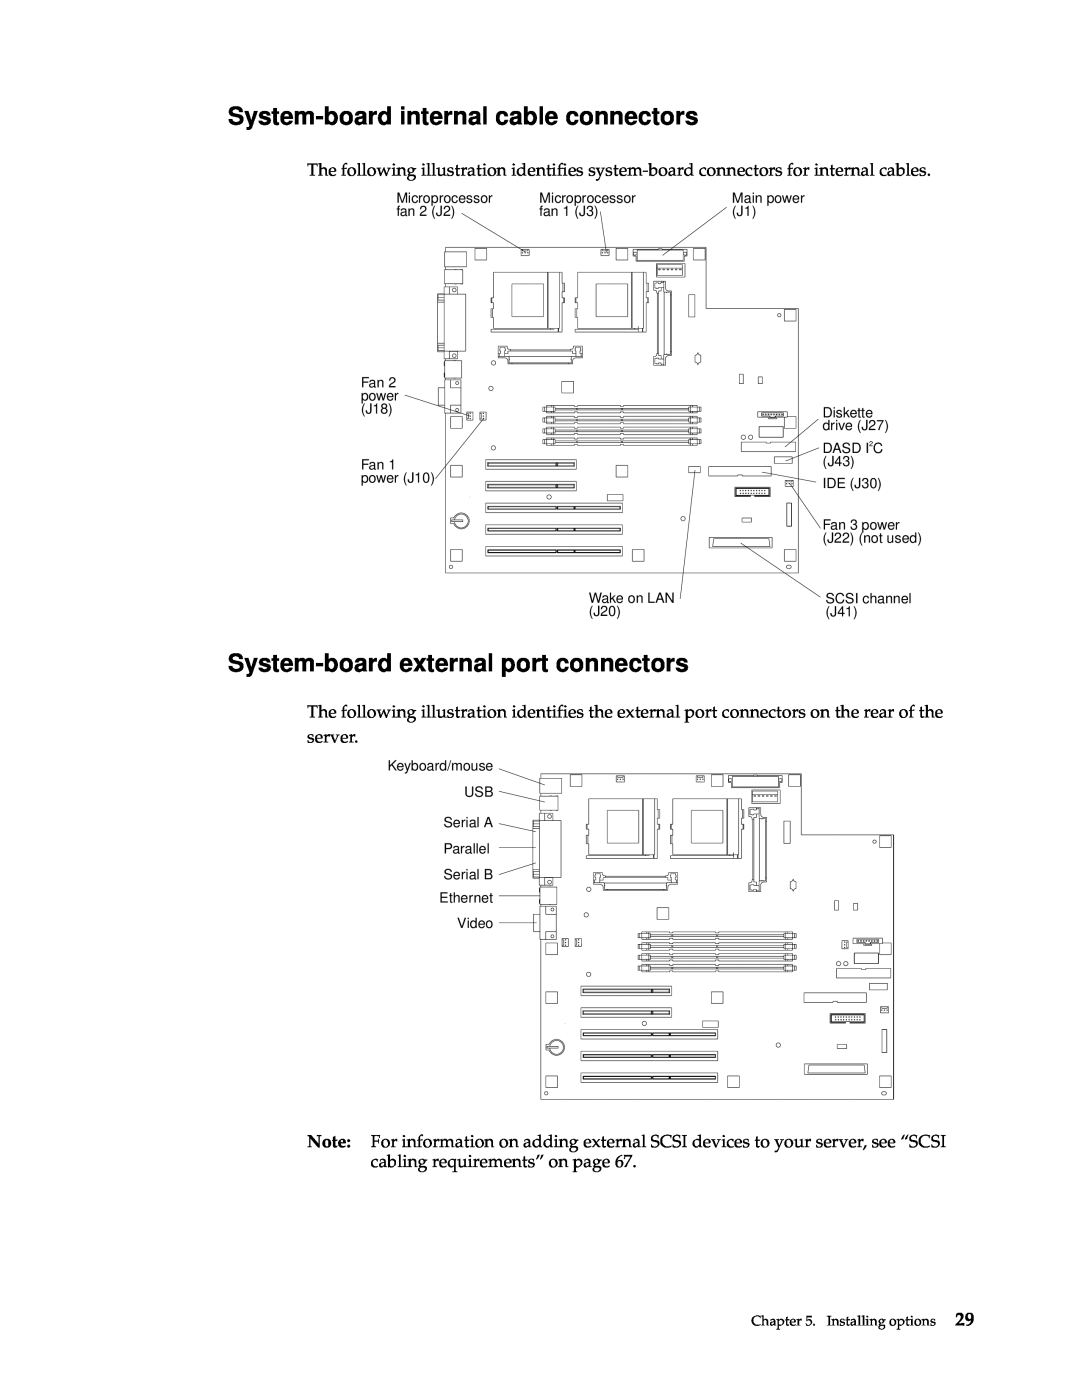 IBM 220 manual System-board internal cable connectors, System-board external port connectors, Installing options 